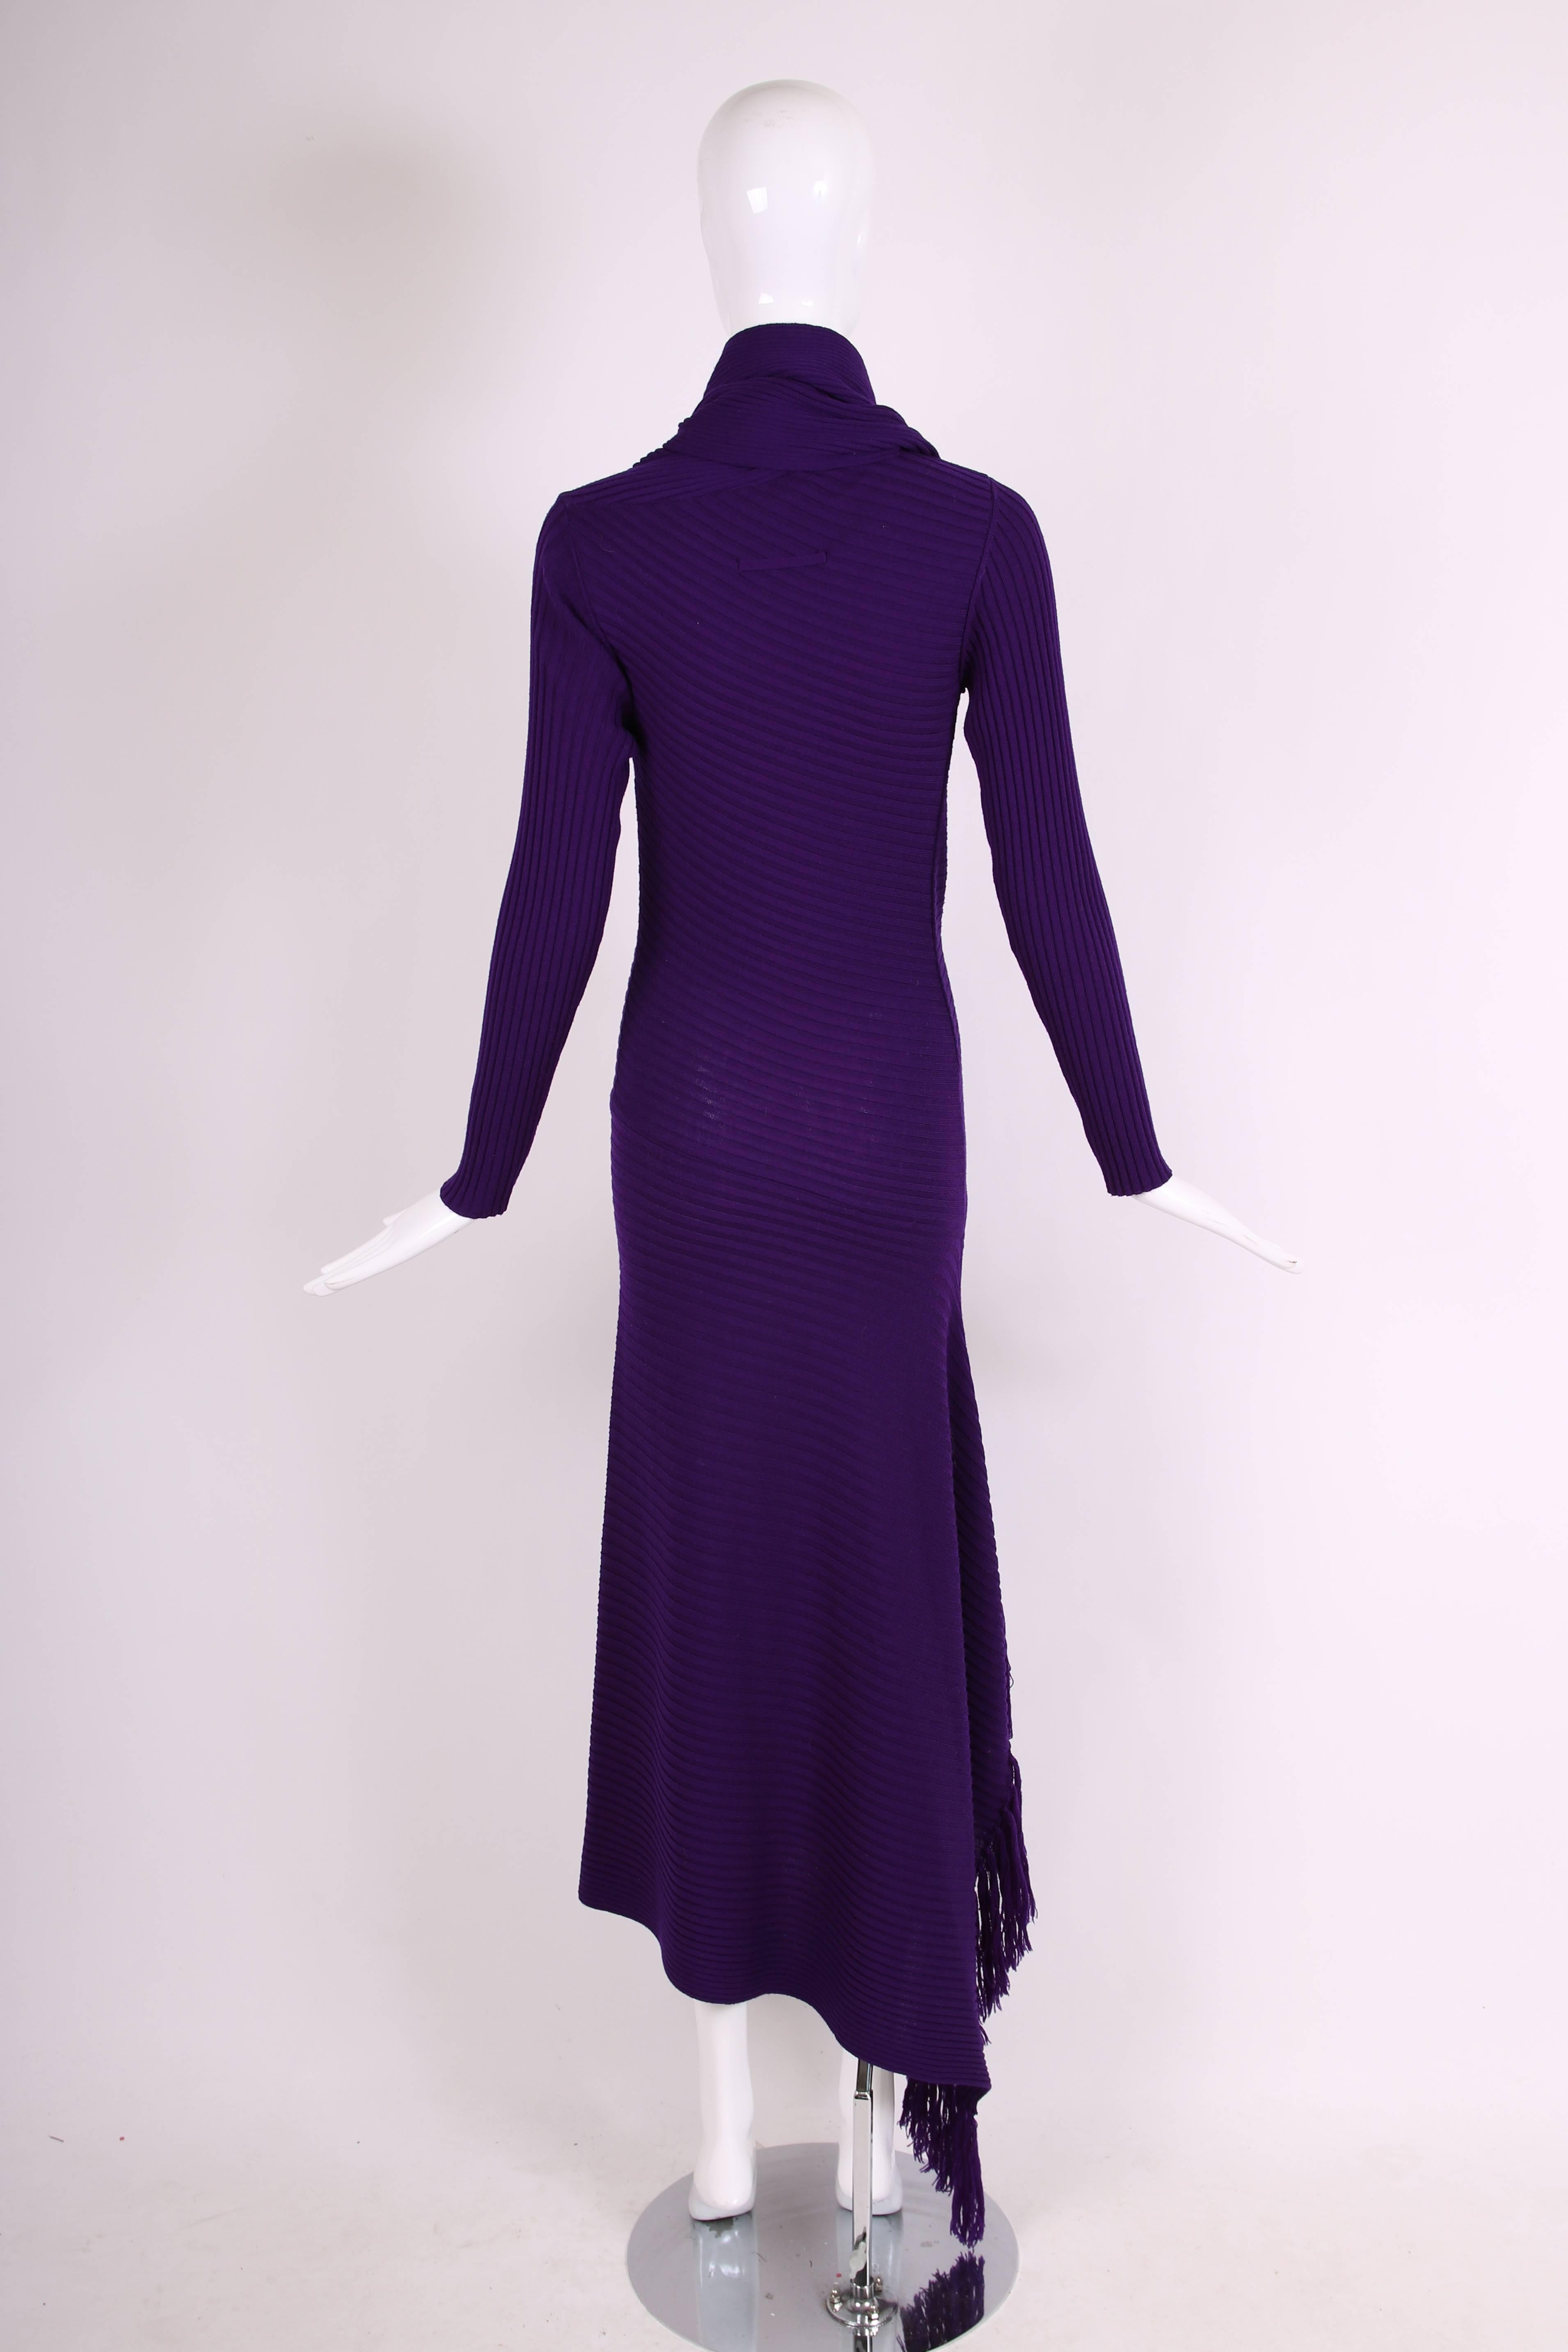 Jean Paul Gaultier Deep Purple Bodycon Dress with Fringed Scarf and Side Slit In Excellent Condition For Sale In Studio City, CA